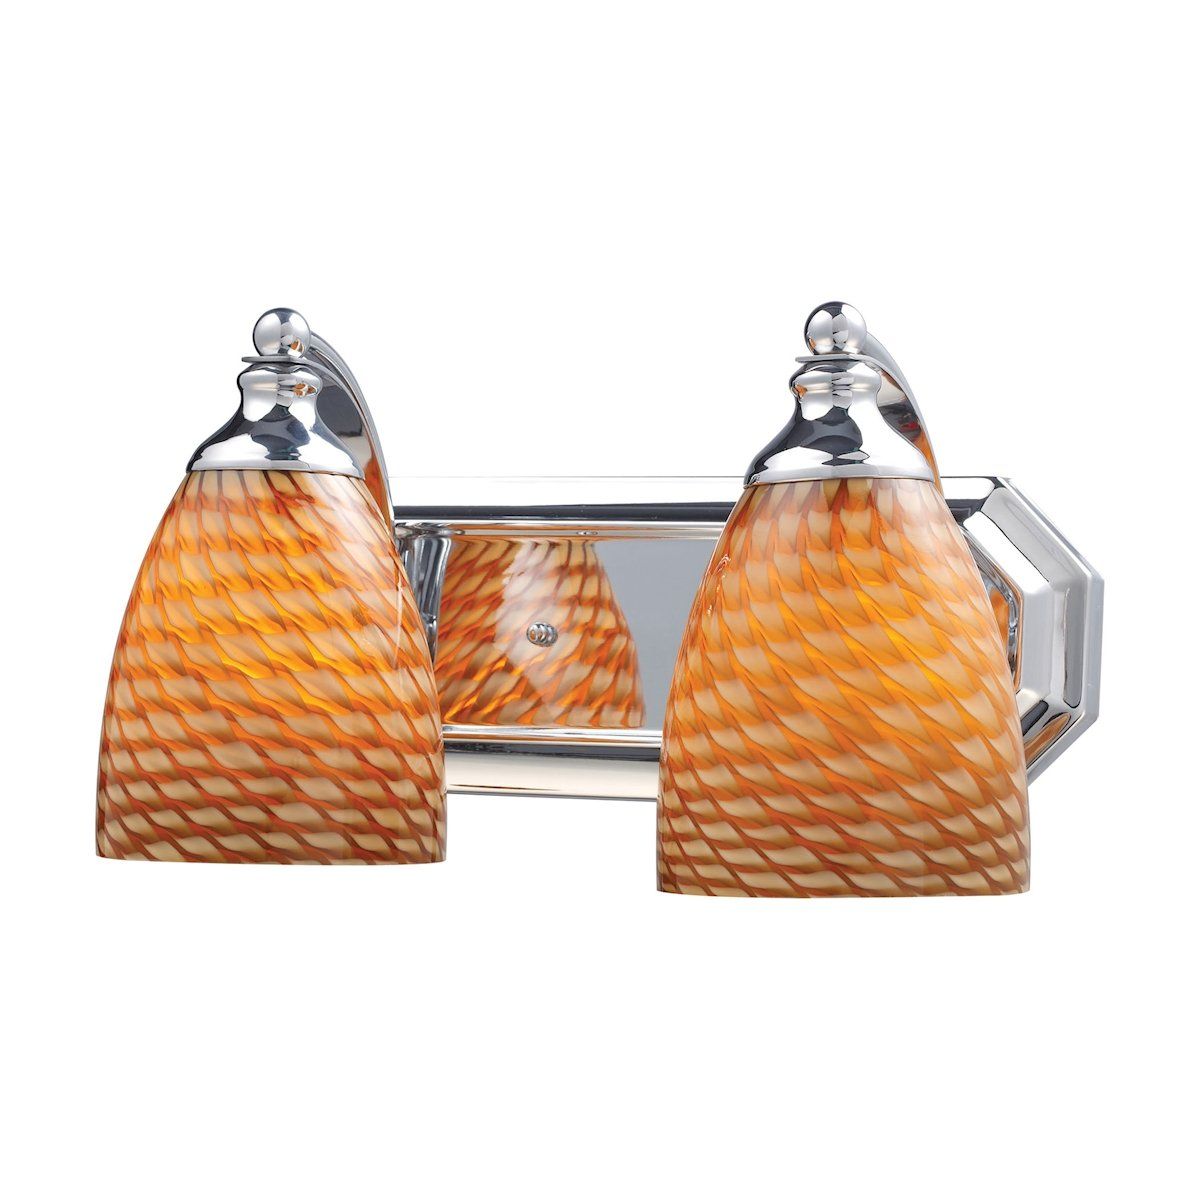 Bath And Spa 2 Light Vanity In Polished Chrome And Cocoa Glass Wall Elk Lighting 